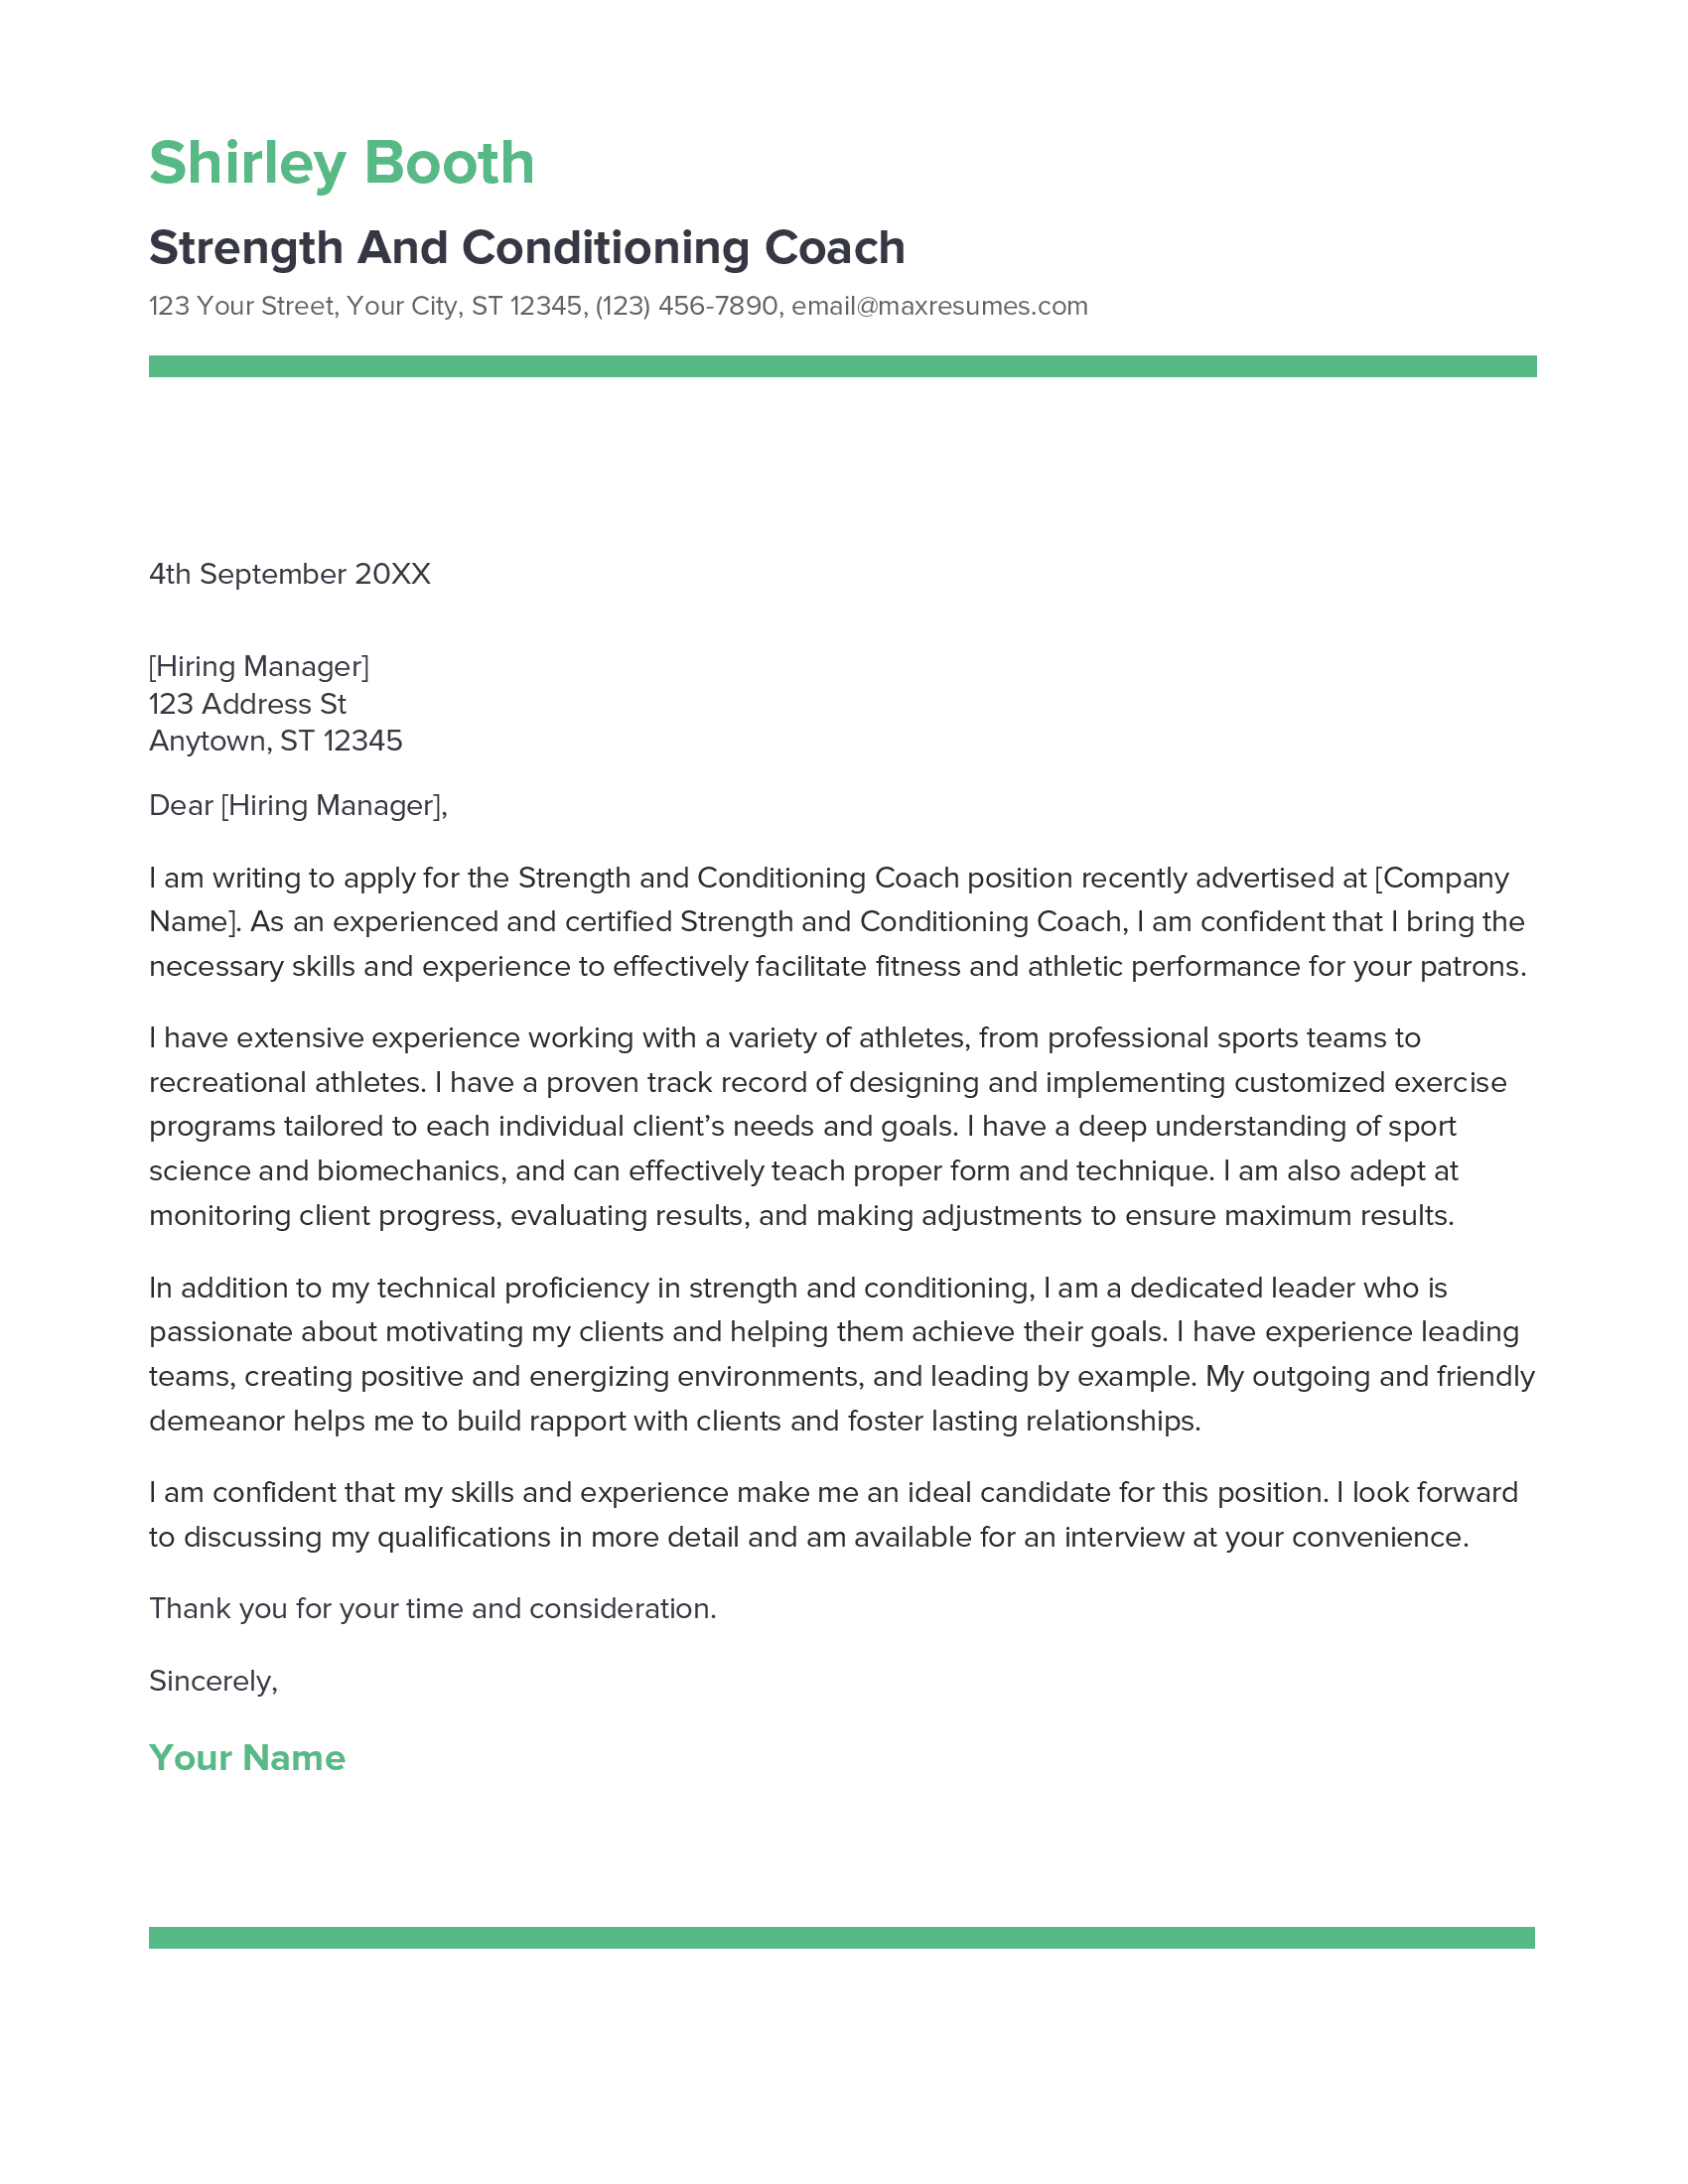 Strength And Conditioning Coach Cover Letter Example